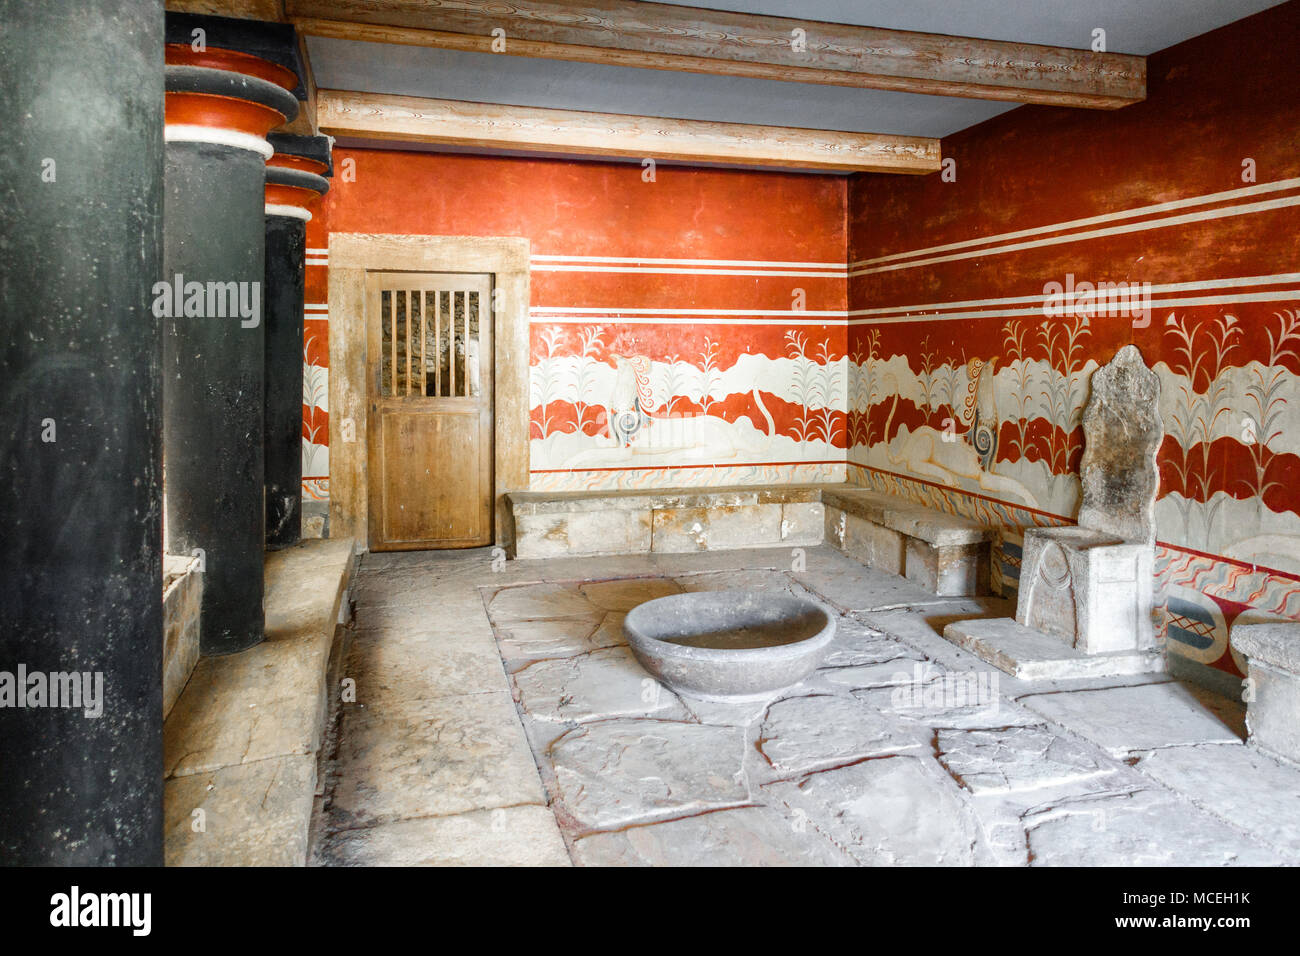 Ancient Throne Room In Knossos Palace Heraklion Crete